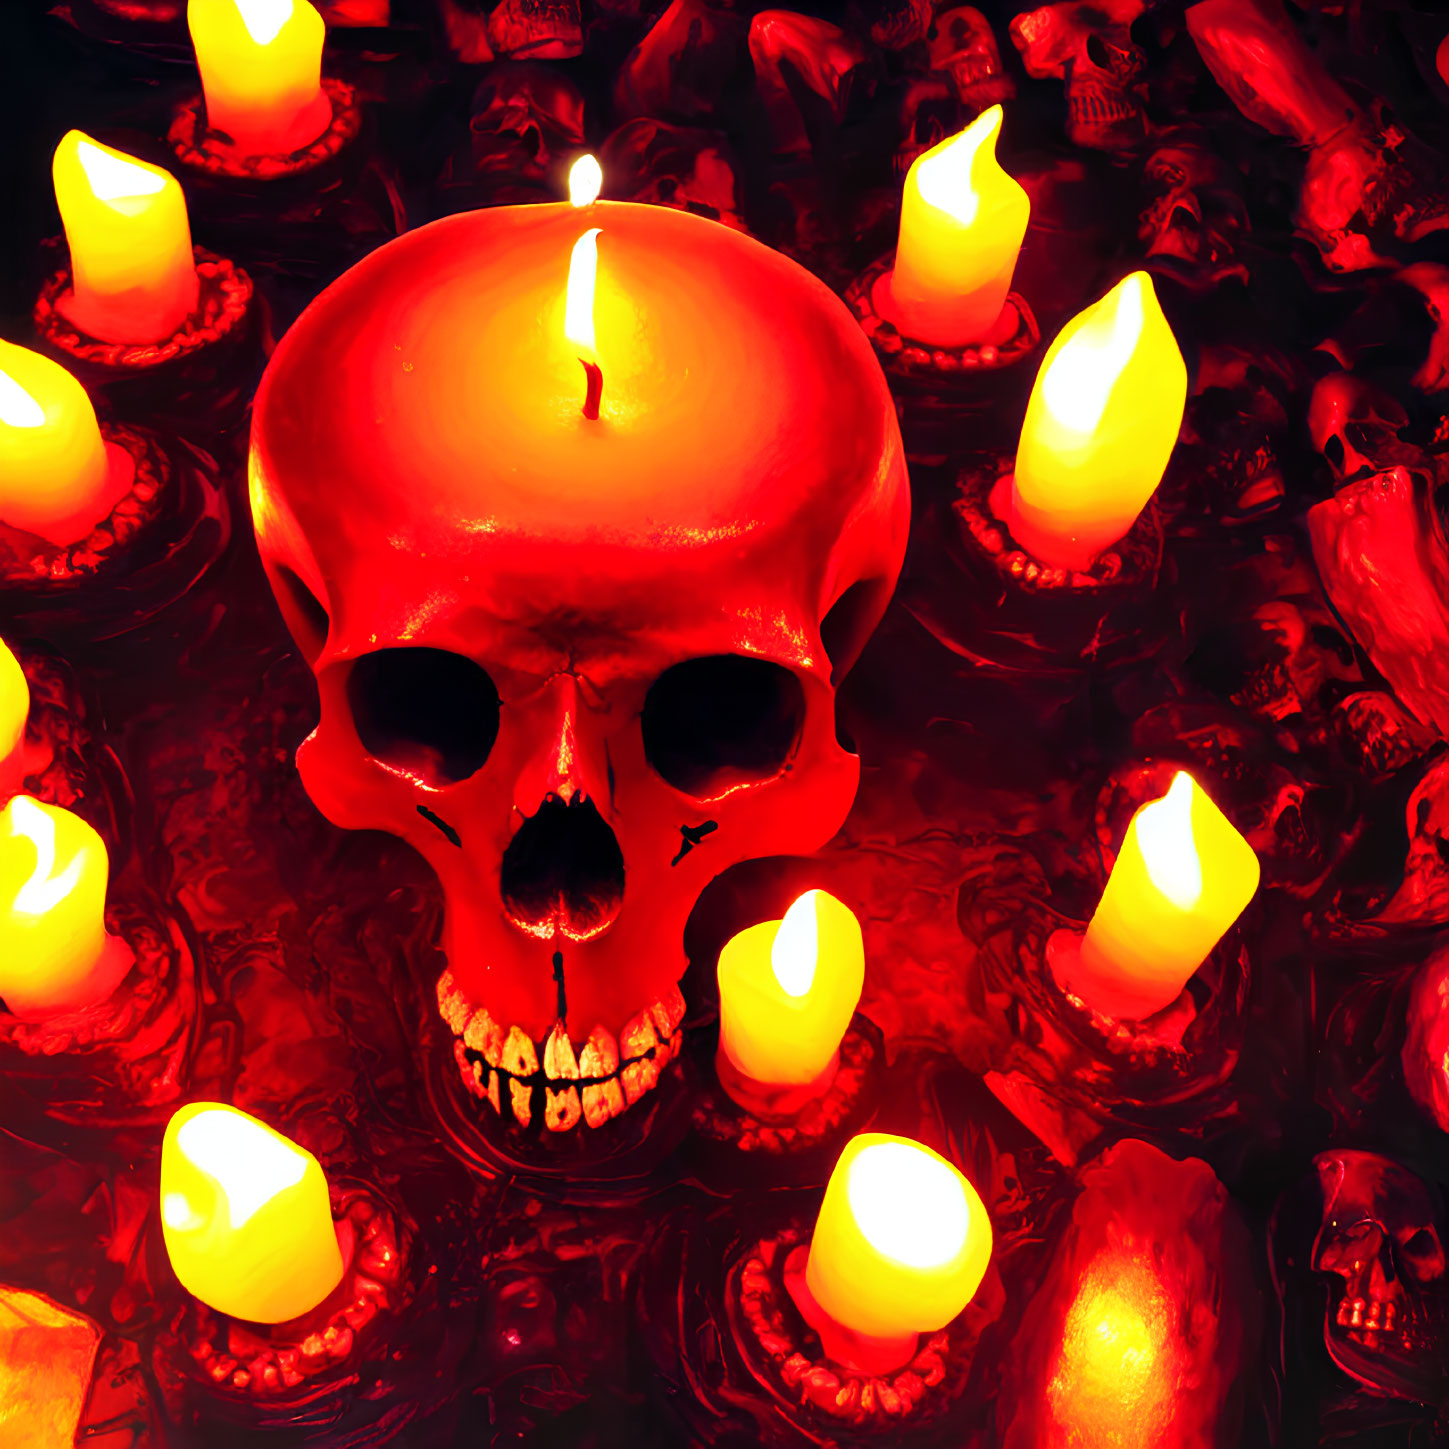 Red Skull-Shaped Candle Illuminated in Dark Setting